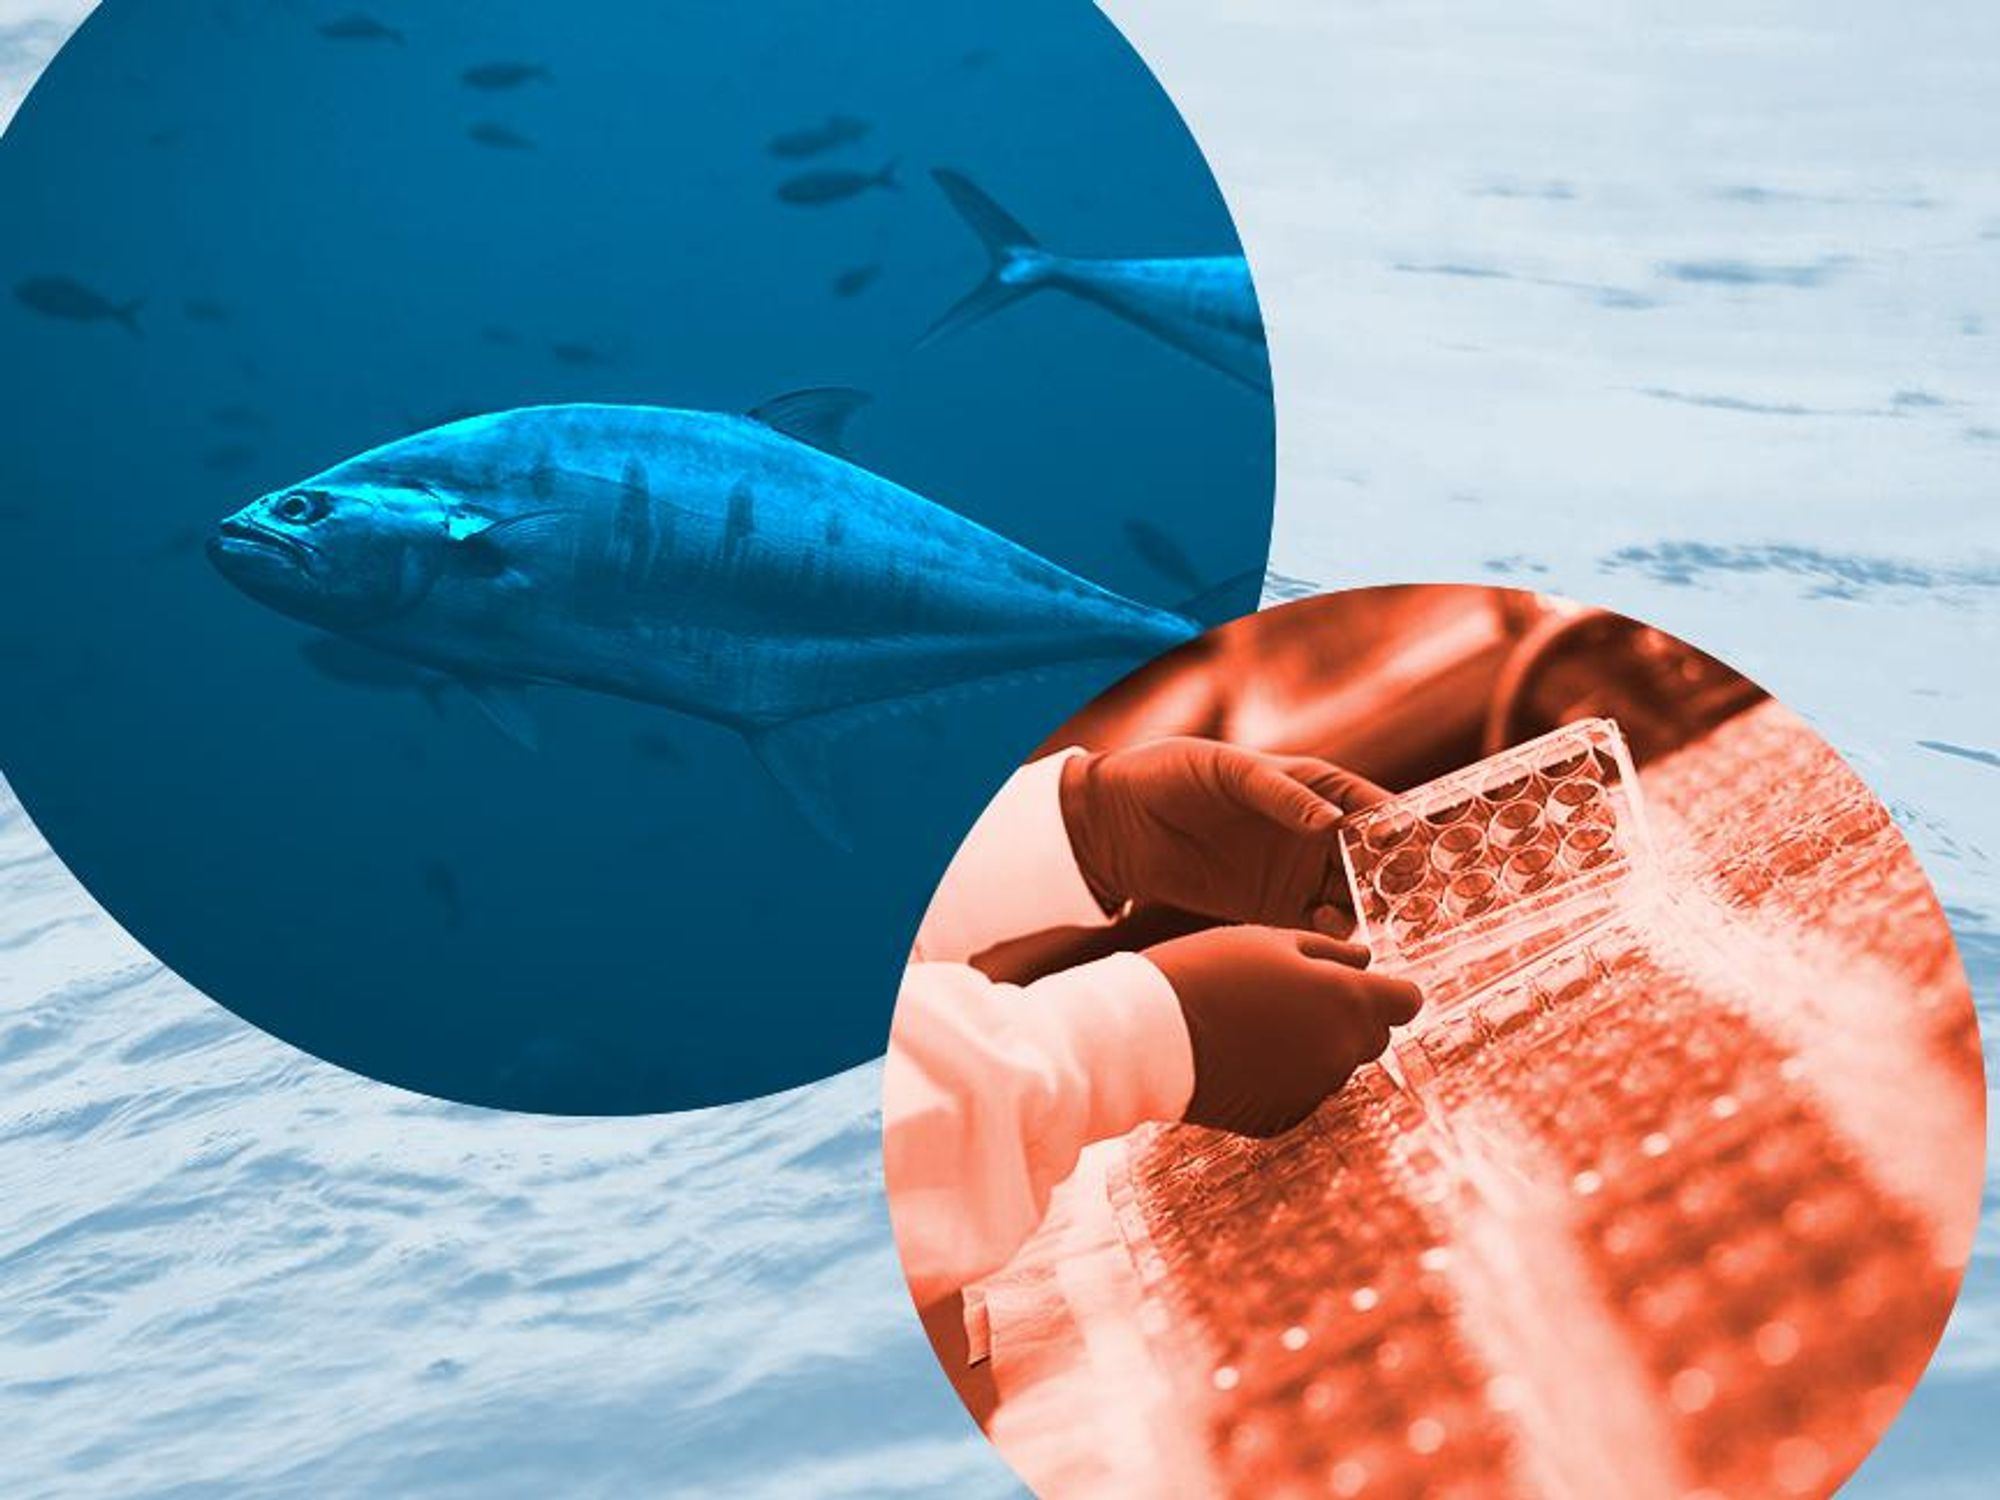 Can Cell-Cultured Seafood Help Stem Overfishing as Global Demand Increases?